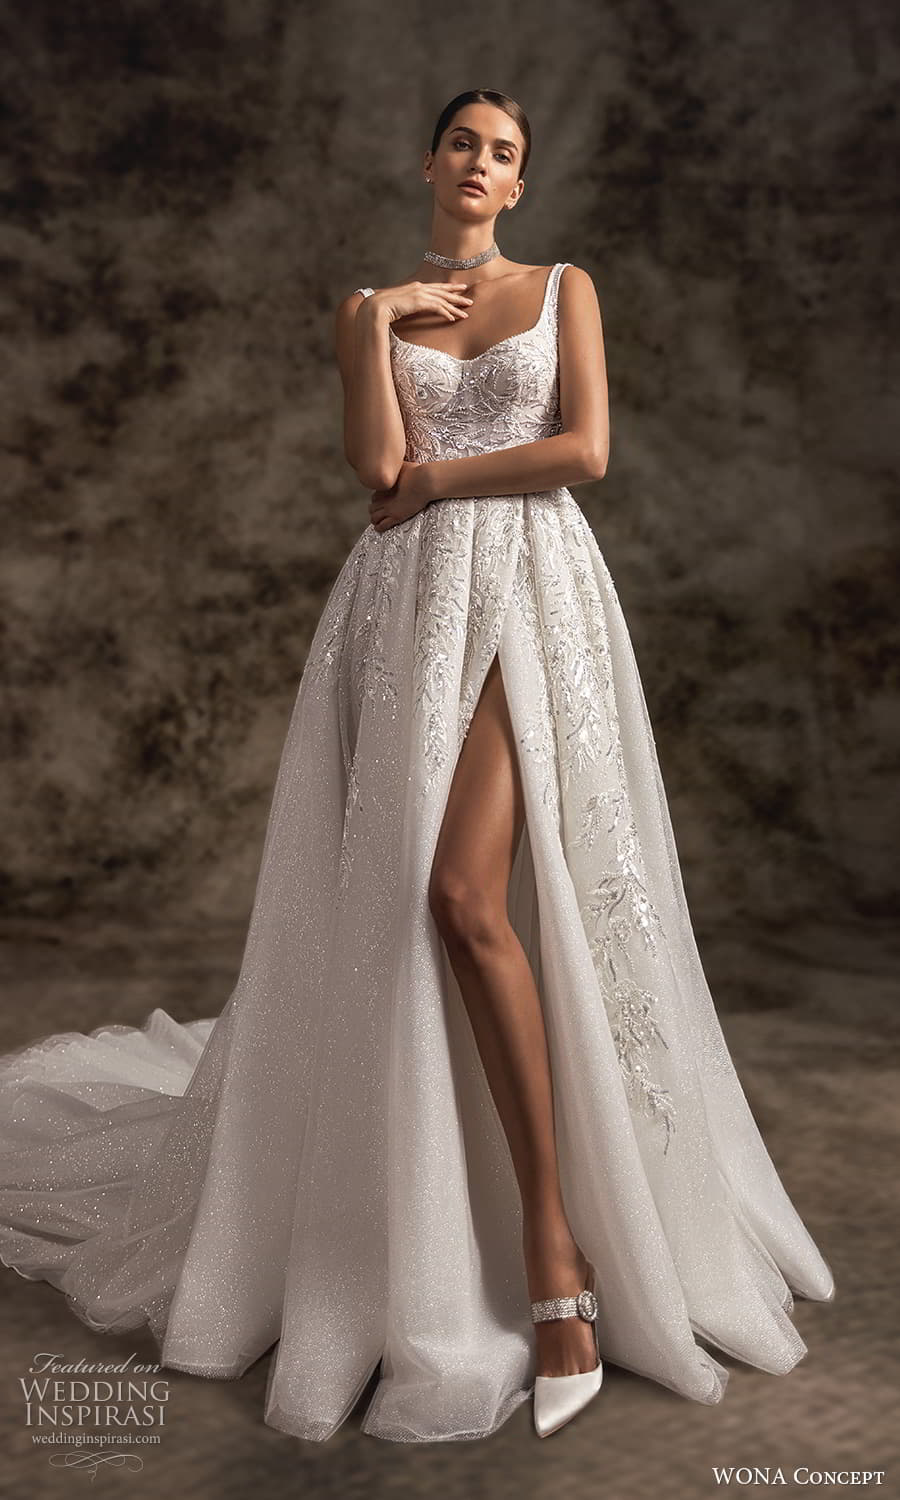 First Look: Wona Concept 2023 Wedding Dresses — “Notte d'Opera” Couture  Bridal Collection, Wedding Inspirasi